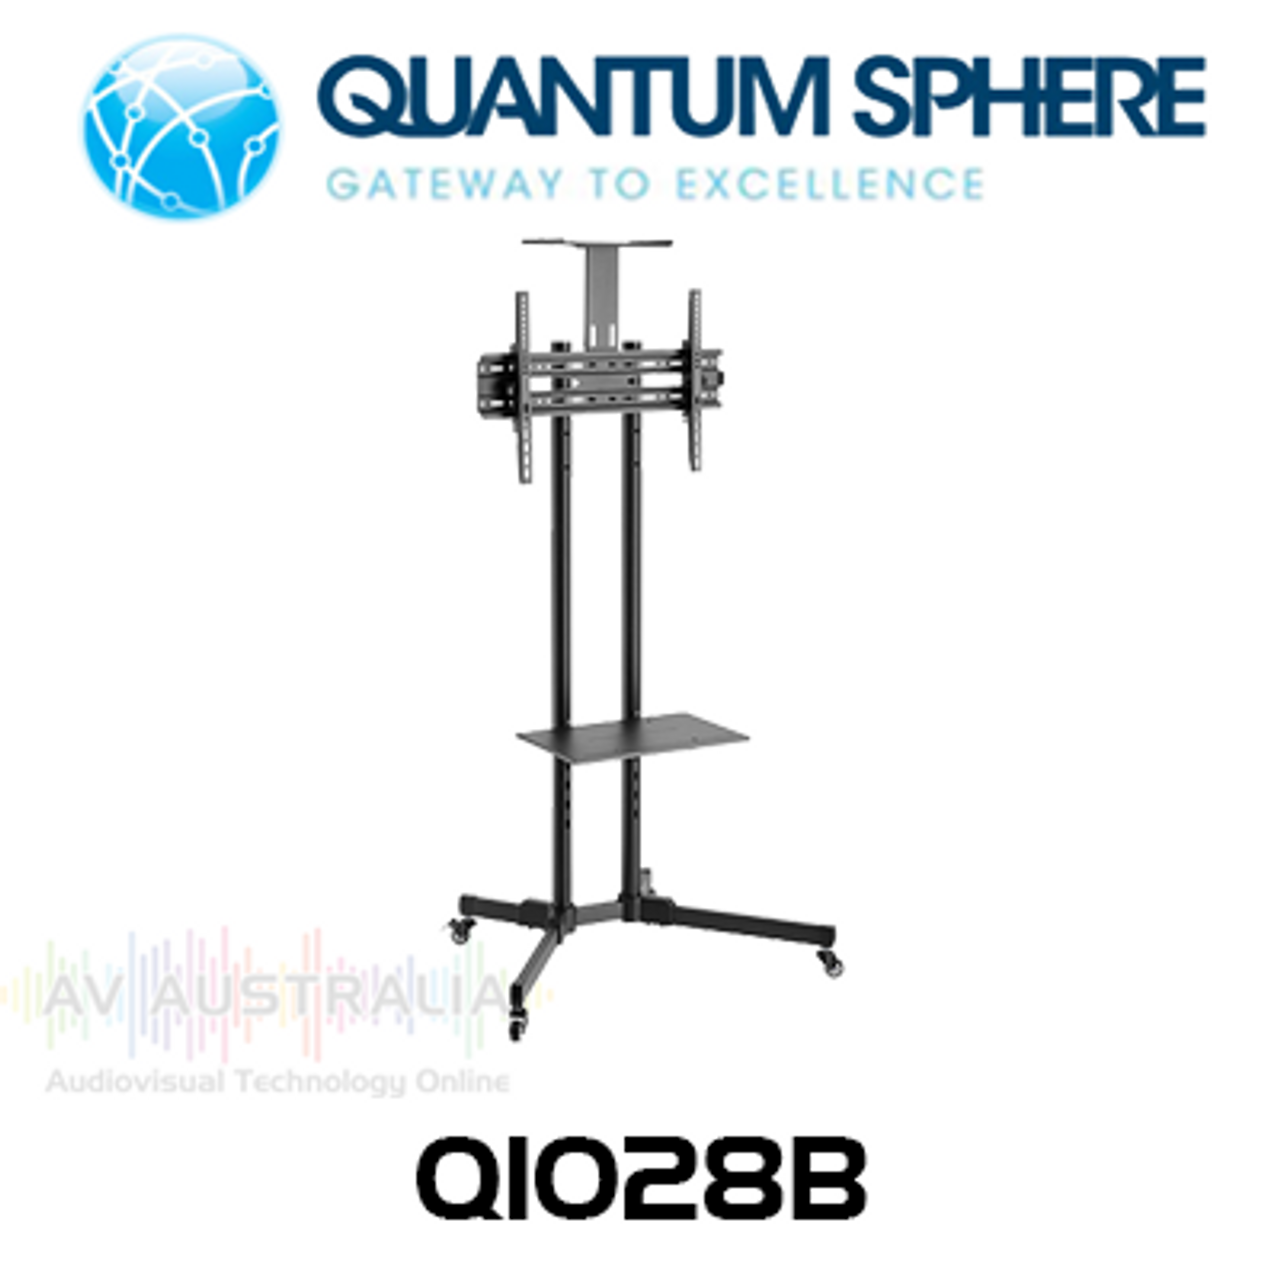 Quantum Sphere 40"-70" Display Universal Video Conferencing Mobile Trolley